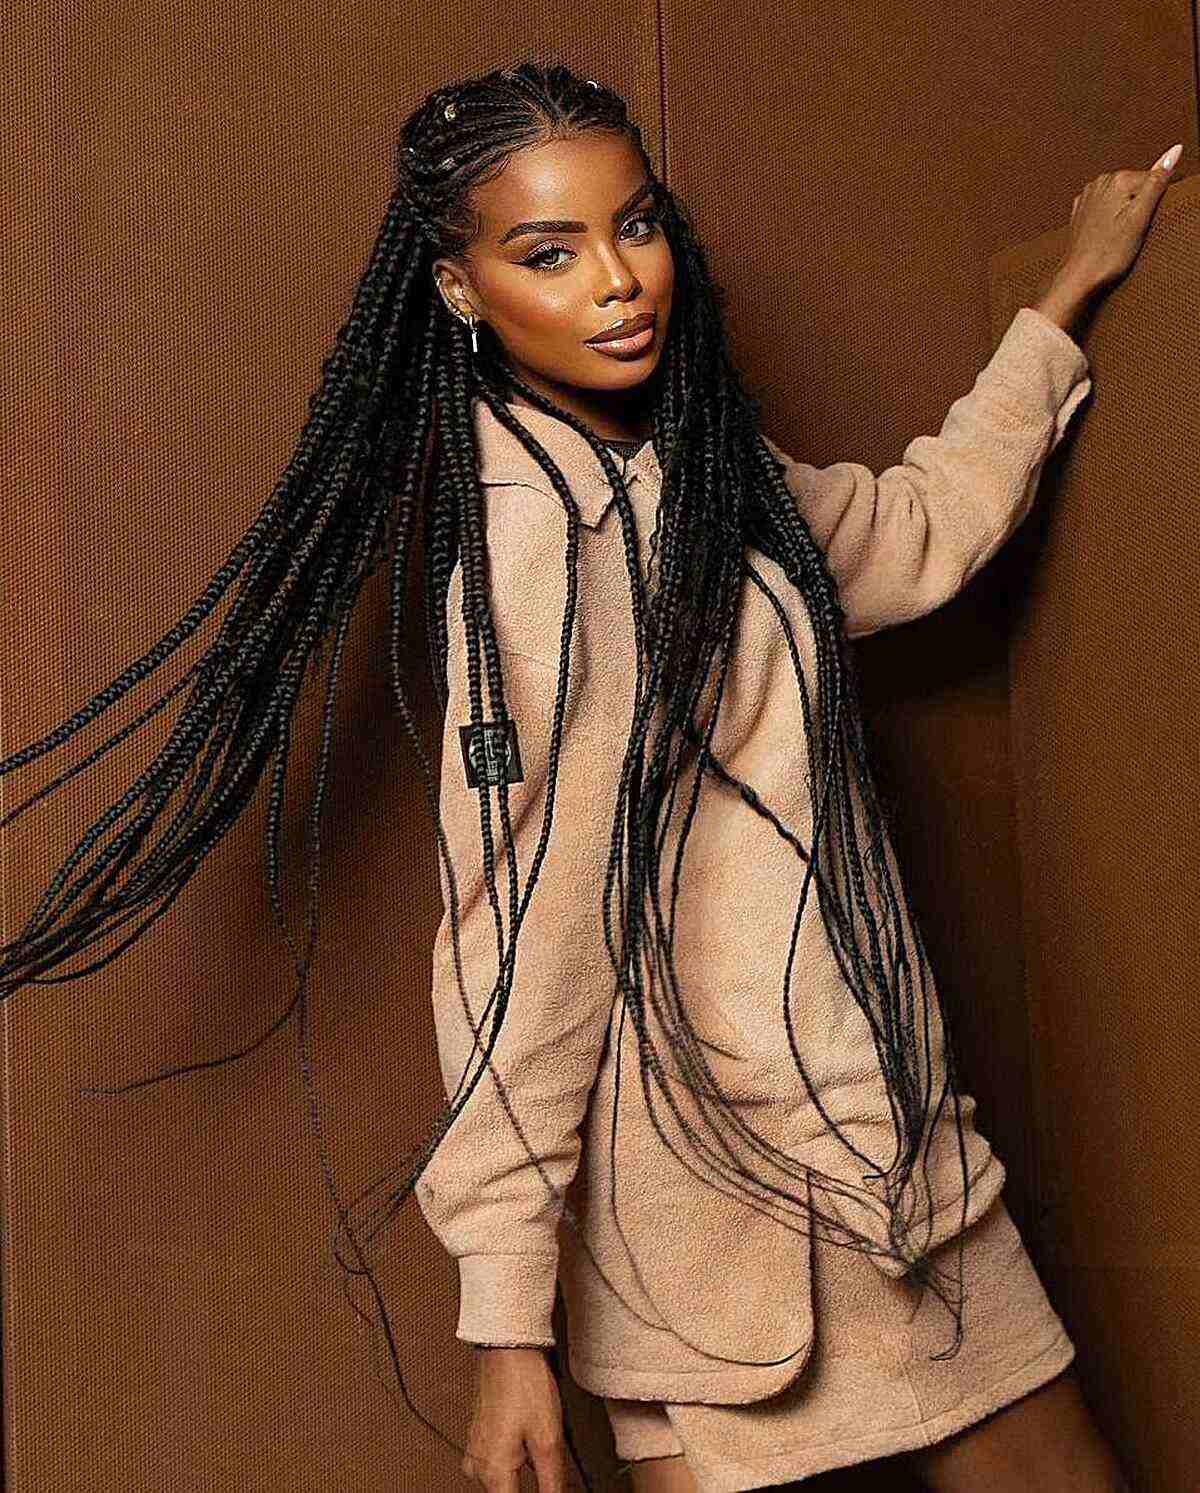 Extra Long Thin Protective Braids for Black Women